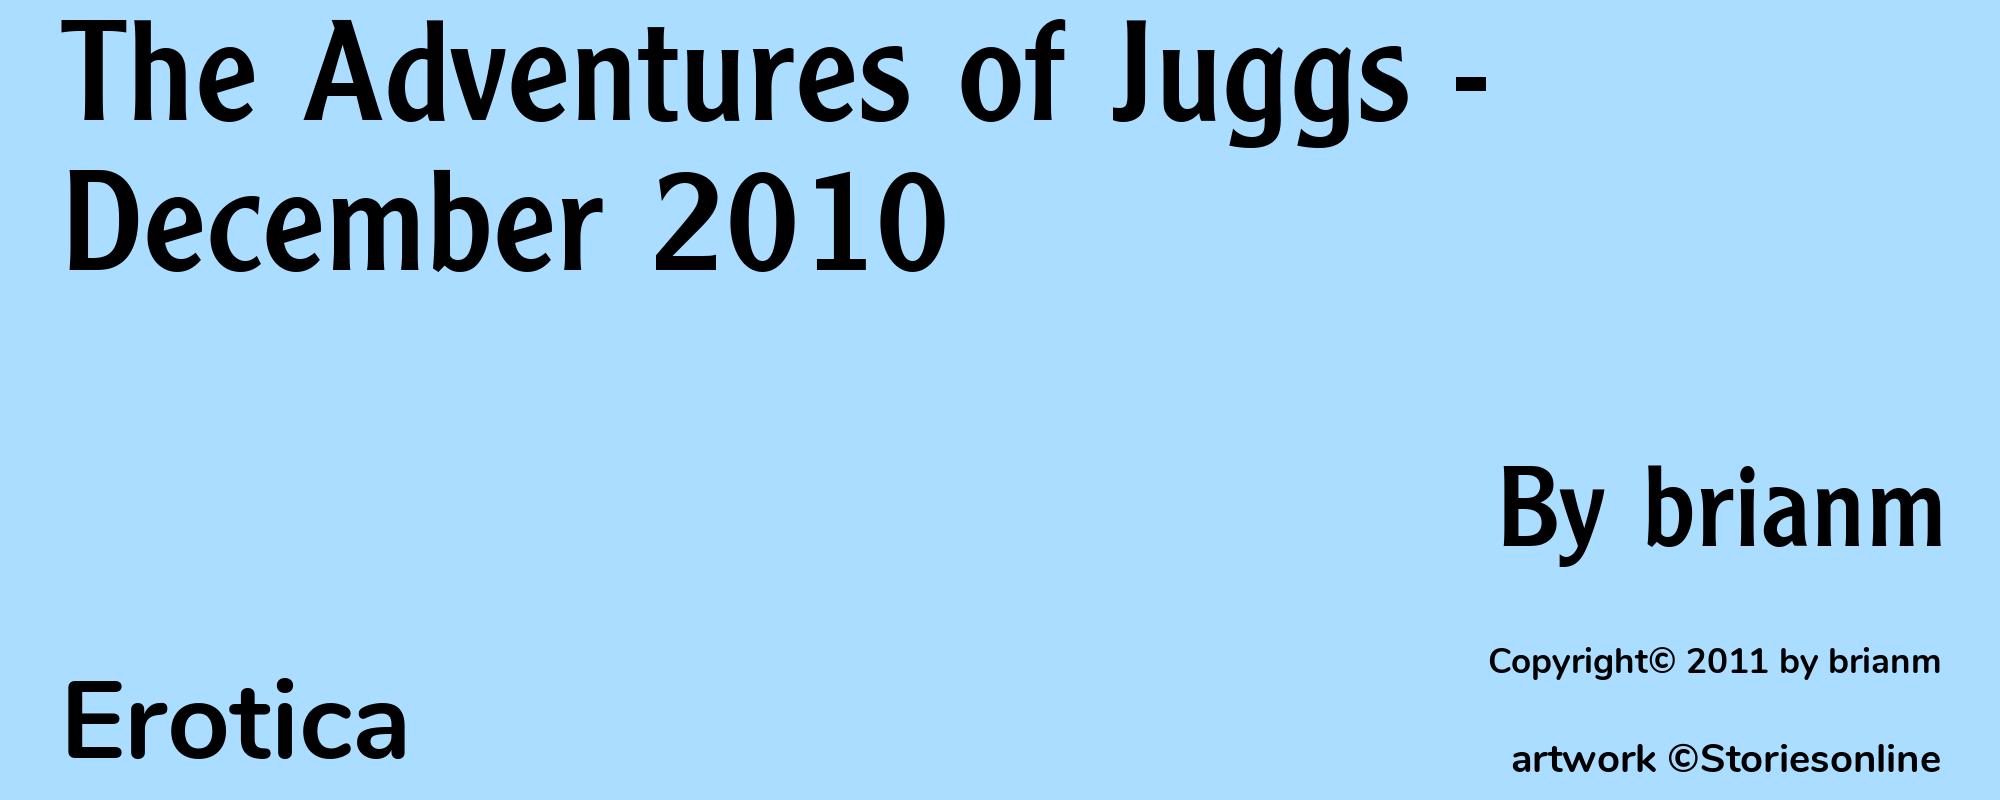 The Adventures of Juggs - December 2010 - Cover